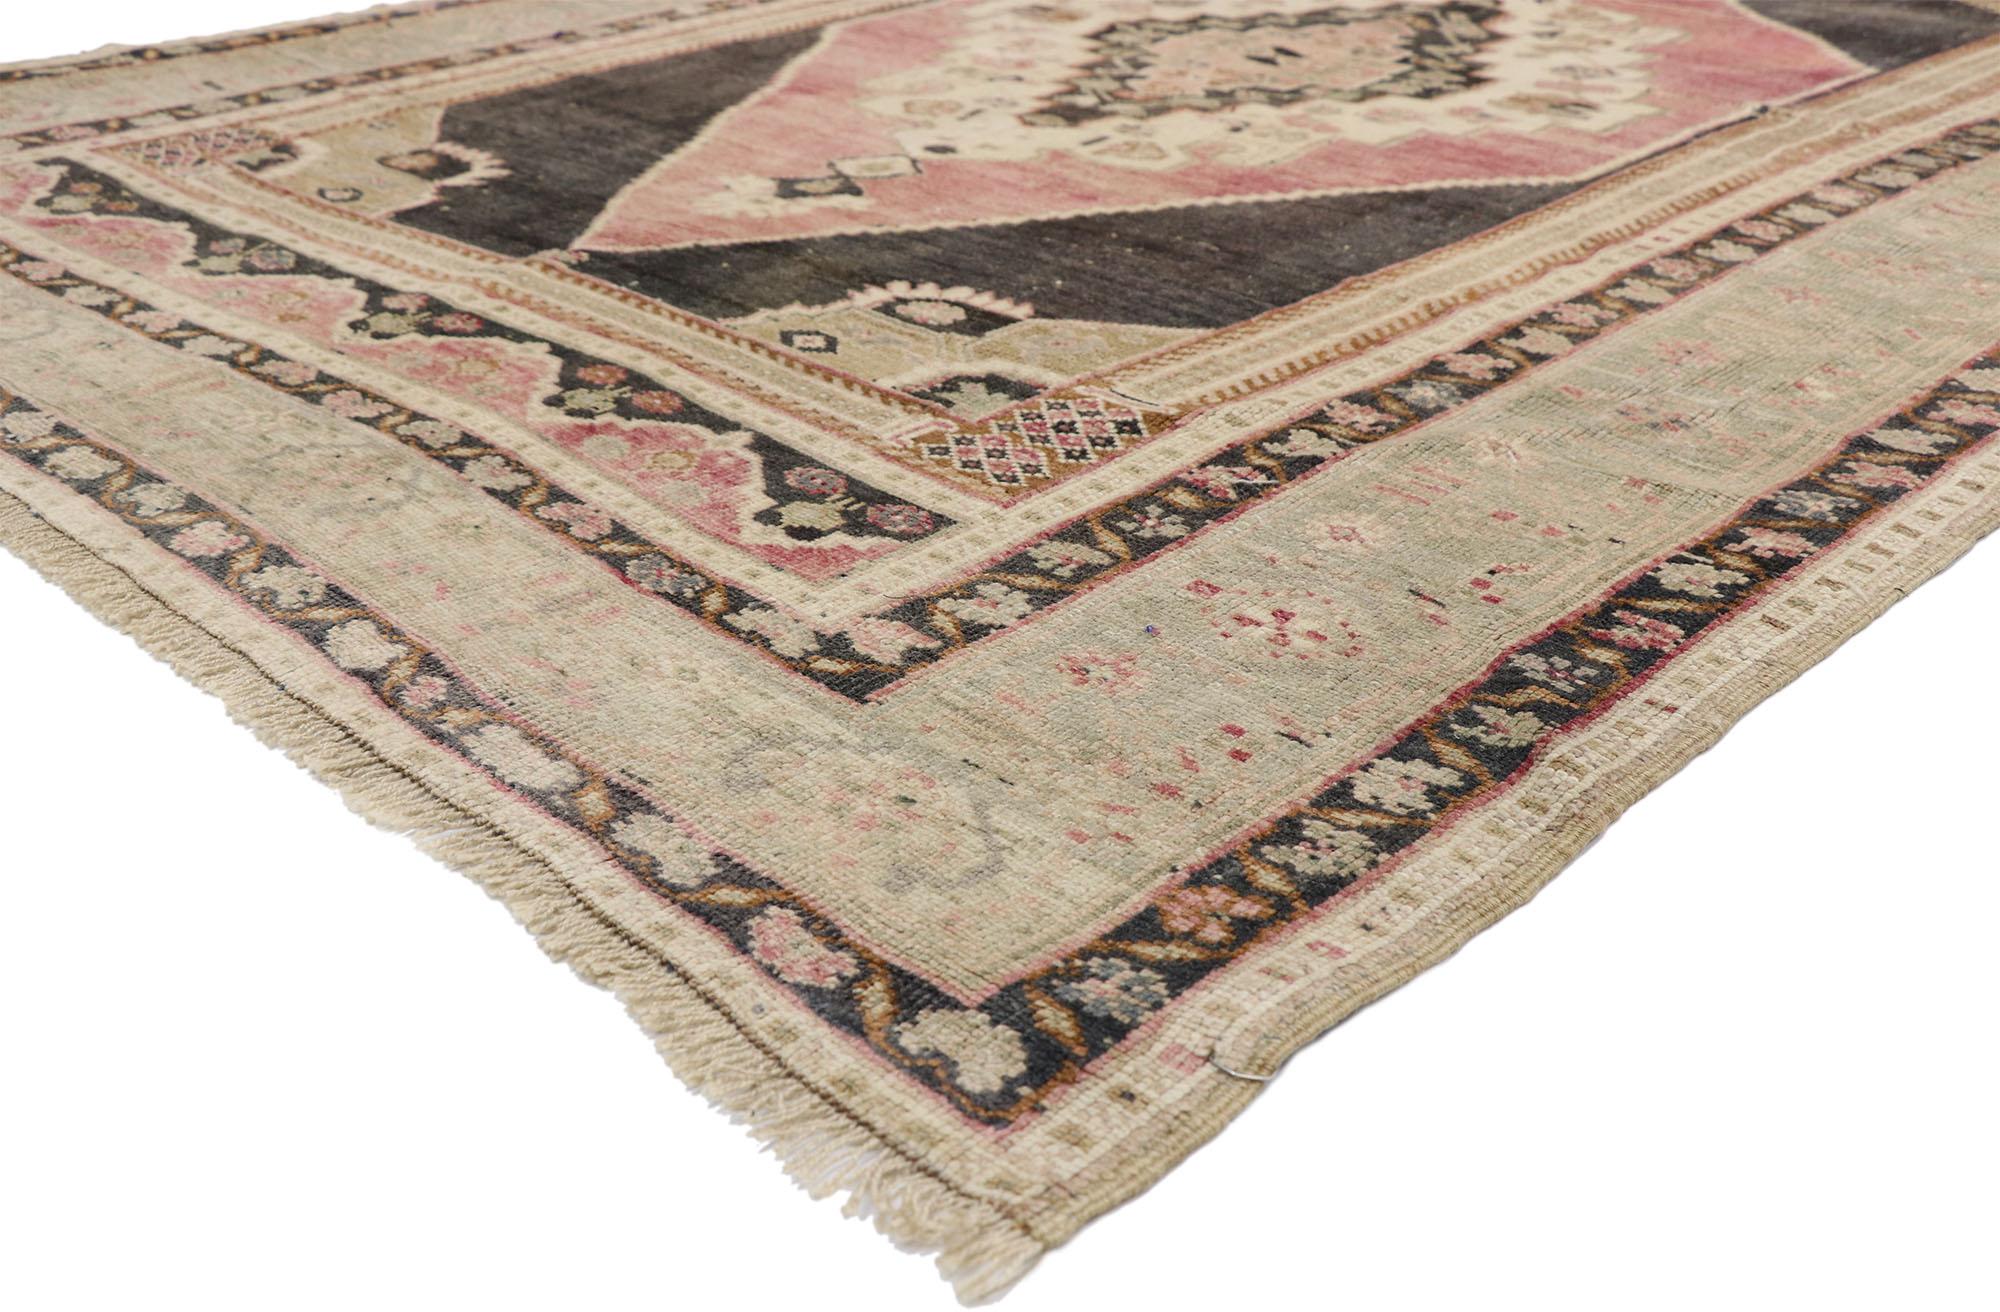 52549, vintage Turkish Oushak rug with Modern Industrial and Amish style. In this hand knotted wool vintage Turkish Oushak rug, we bare witness to the successful application of design principles touted by a Modern Amish style. A series of concentric